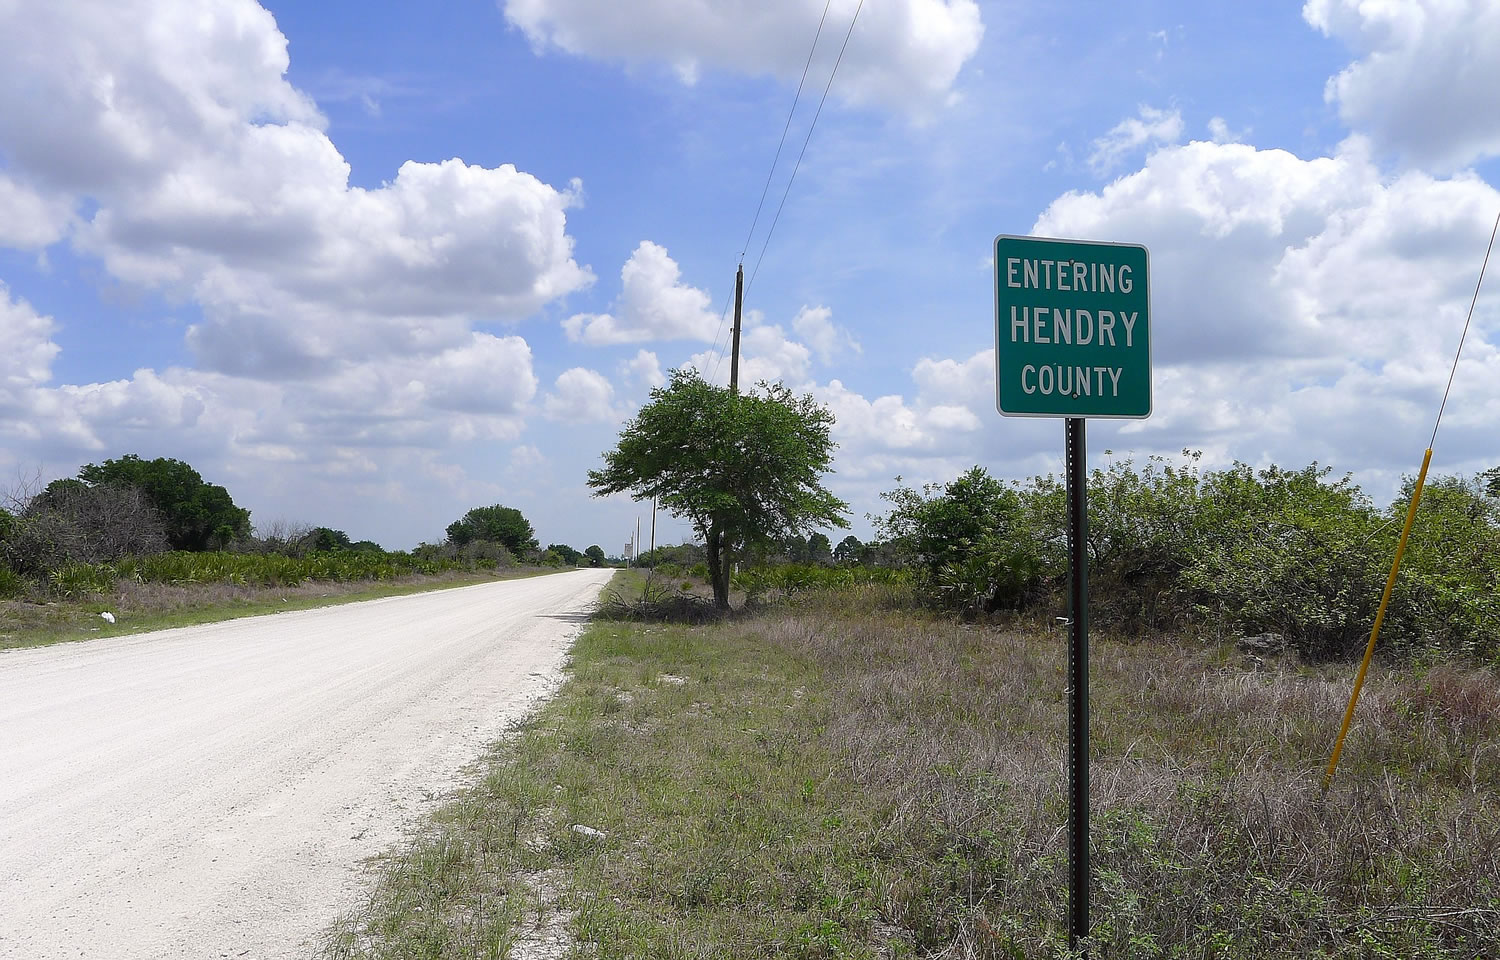 A marker identifying the Hendry County line in Florida.